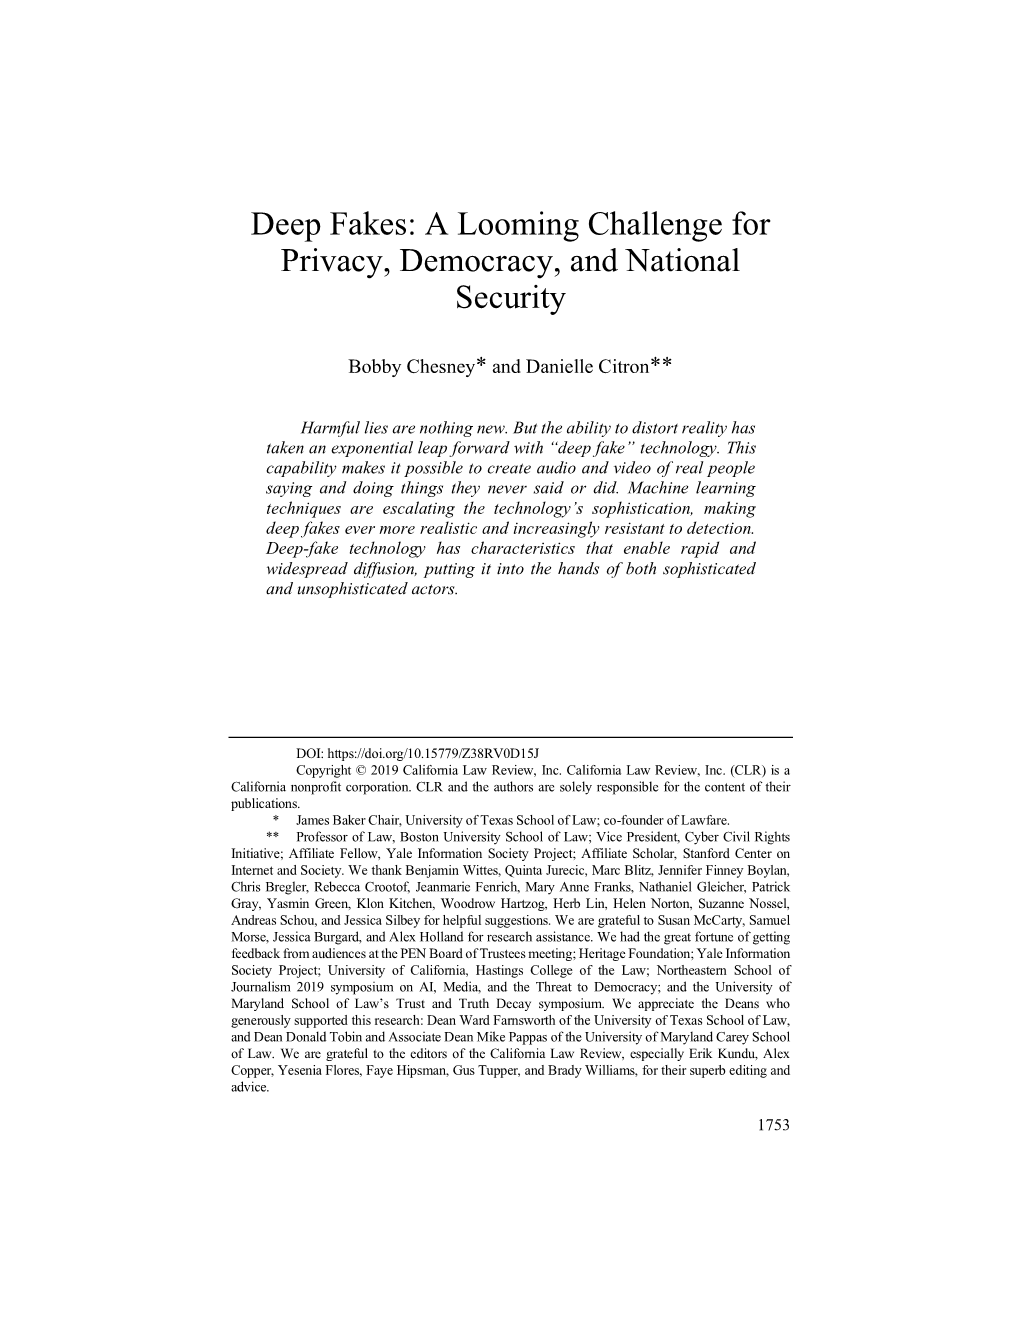 Deep Fakes: a Looming Challenge for Privacy, Democracy, and National Security